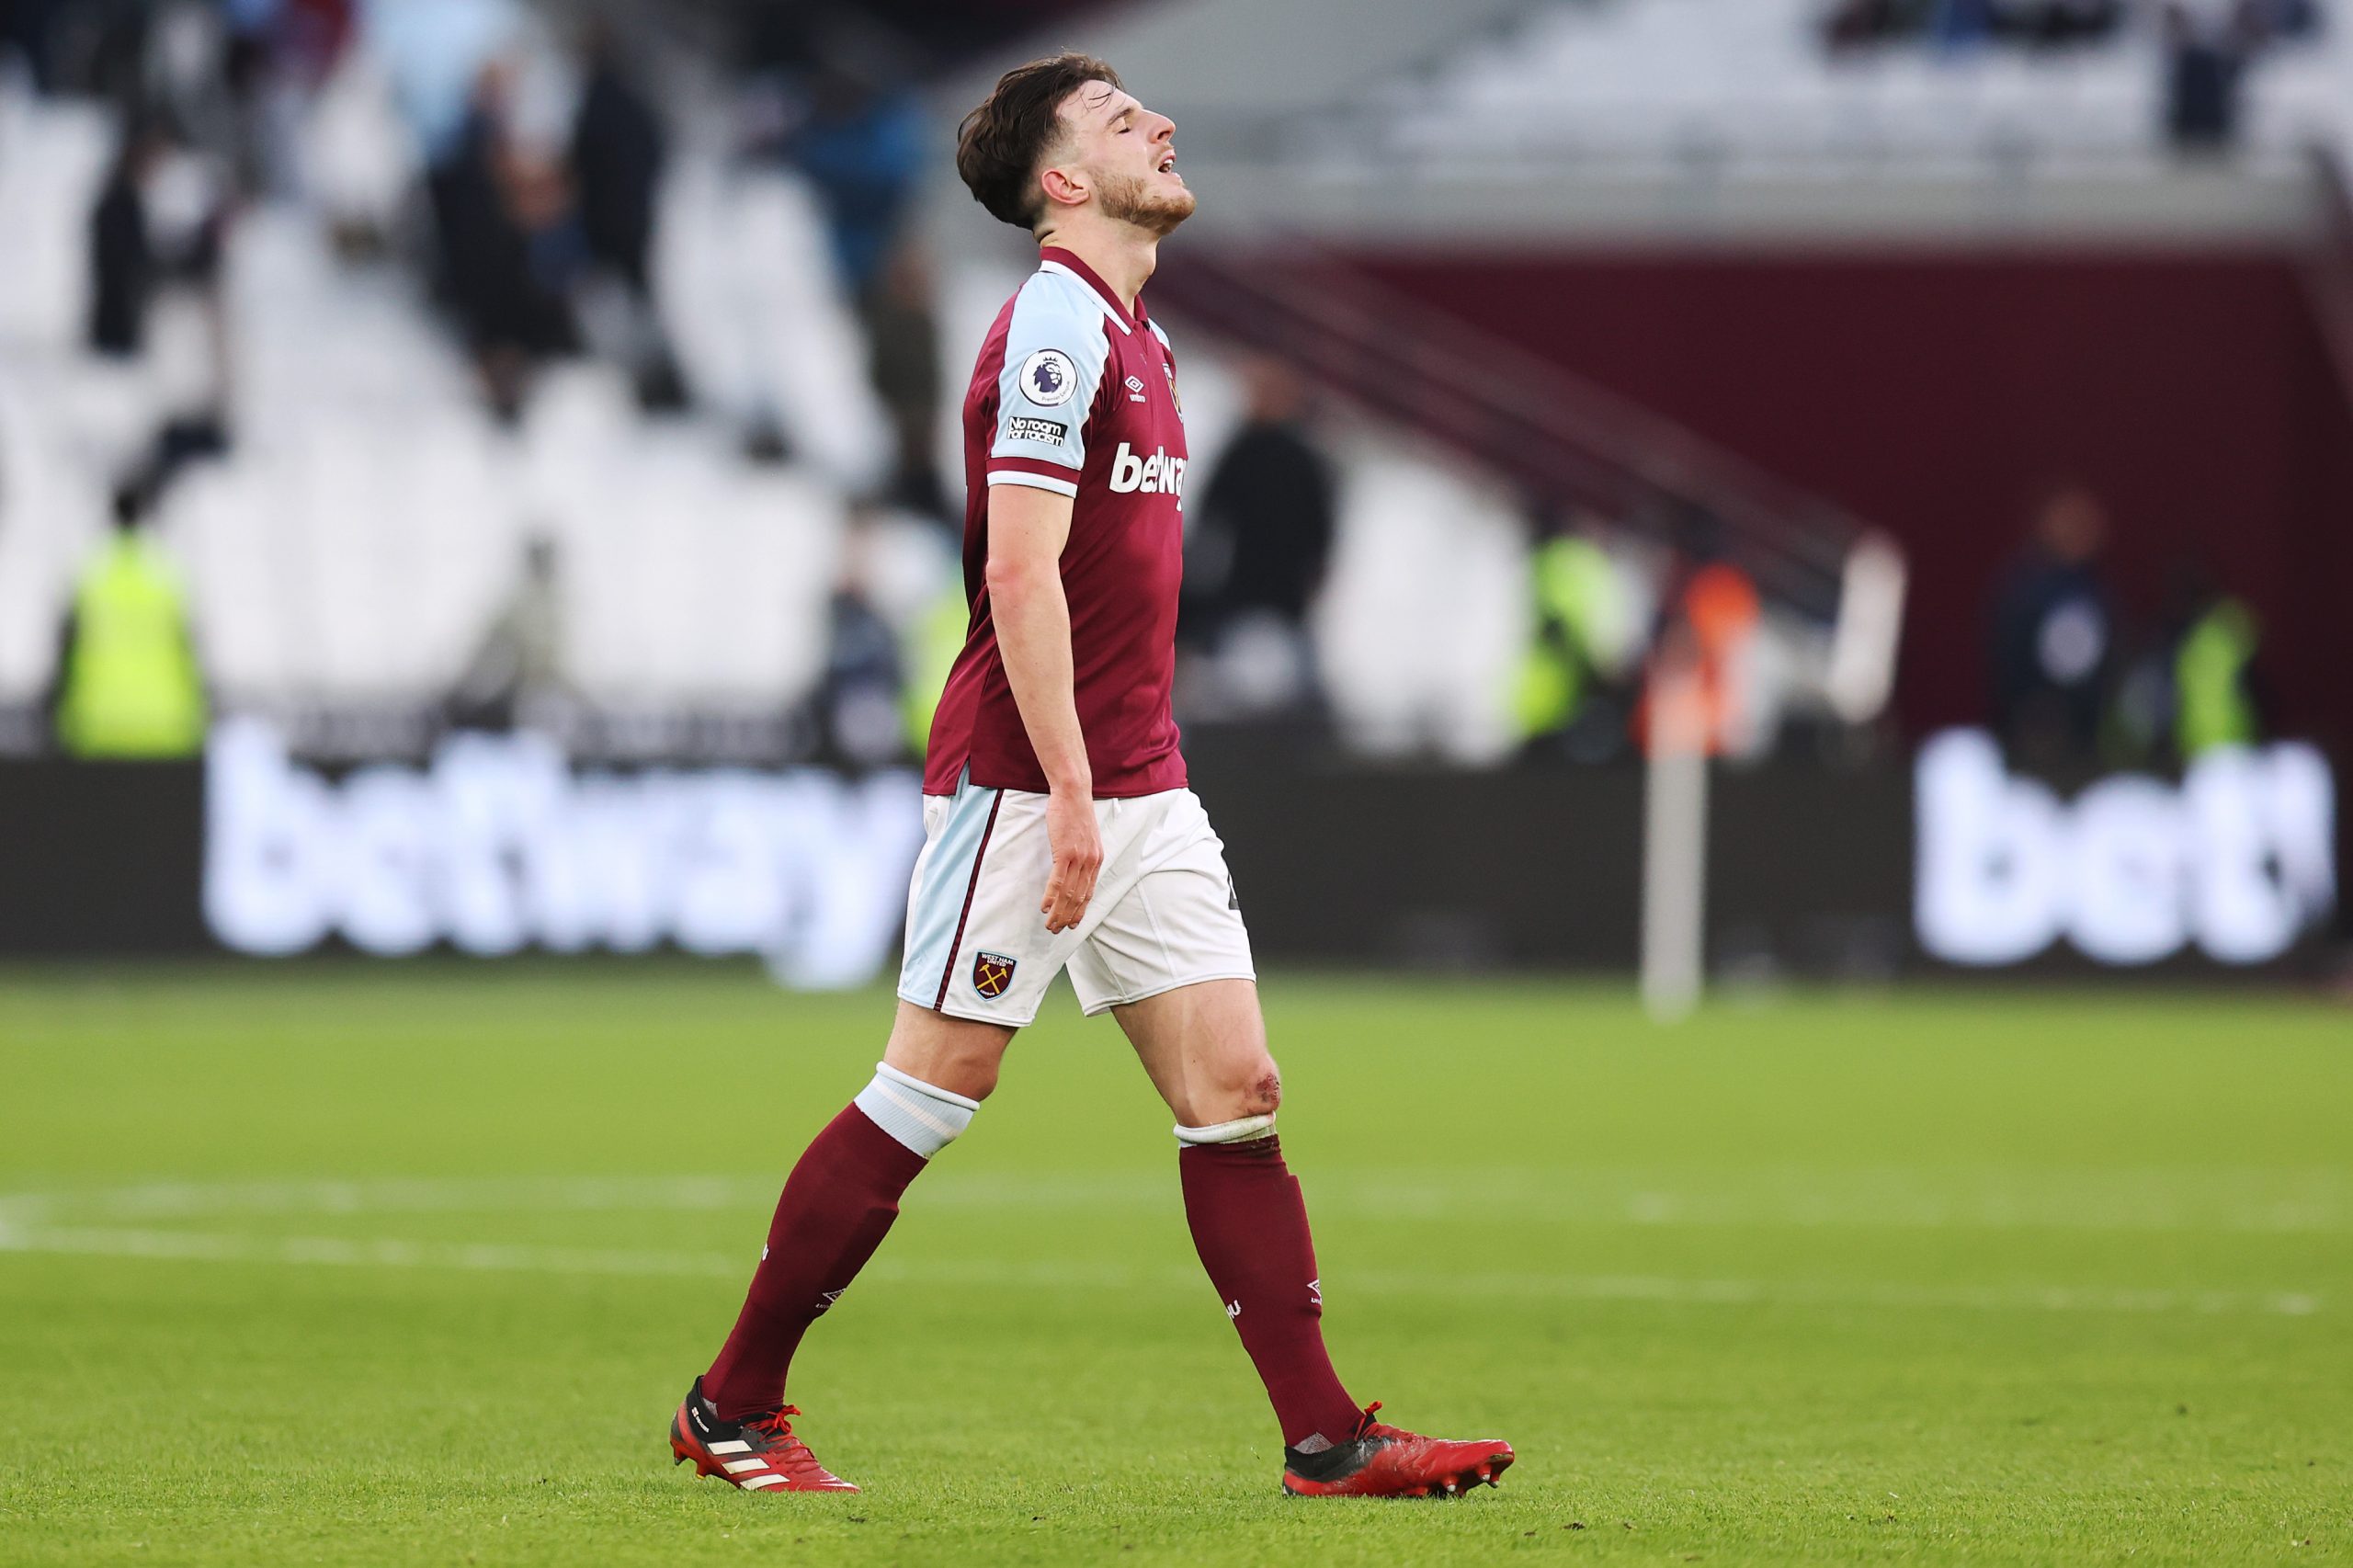 LONDON, ENGLAND - JANUARY 16: Declan Rice of West Ham United looks dejected following their side's defeat in the Premier League match between West Ham United and Leeds United at London Stadium on January 16, 2022 in London, England. (Photo by Alex Pantling/Getty Images)The 4th Official uses images provided by the following image agency:
Getty Images (https://www.gettyimages.de/)
Imago Images (https://www.imago-images.de/)